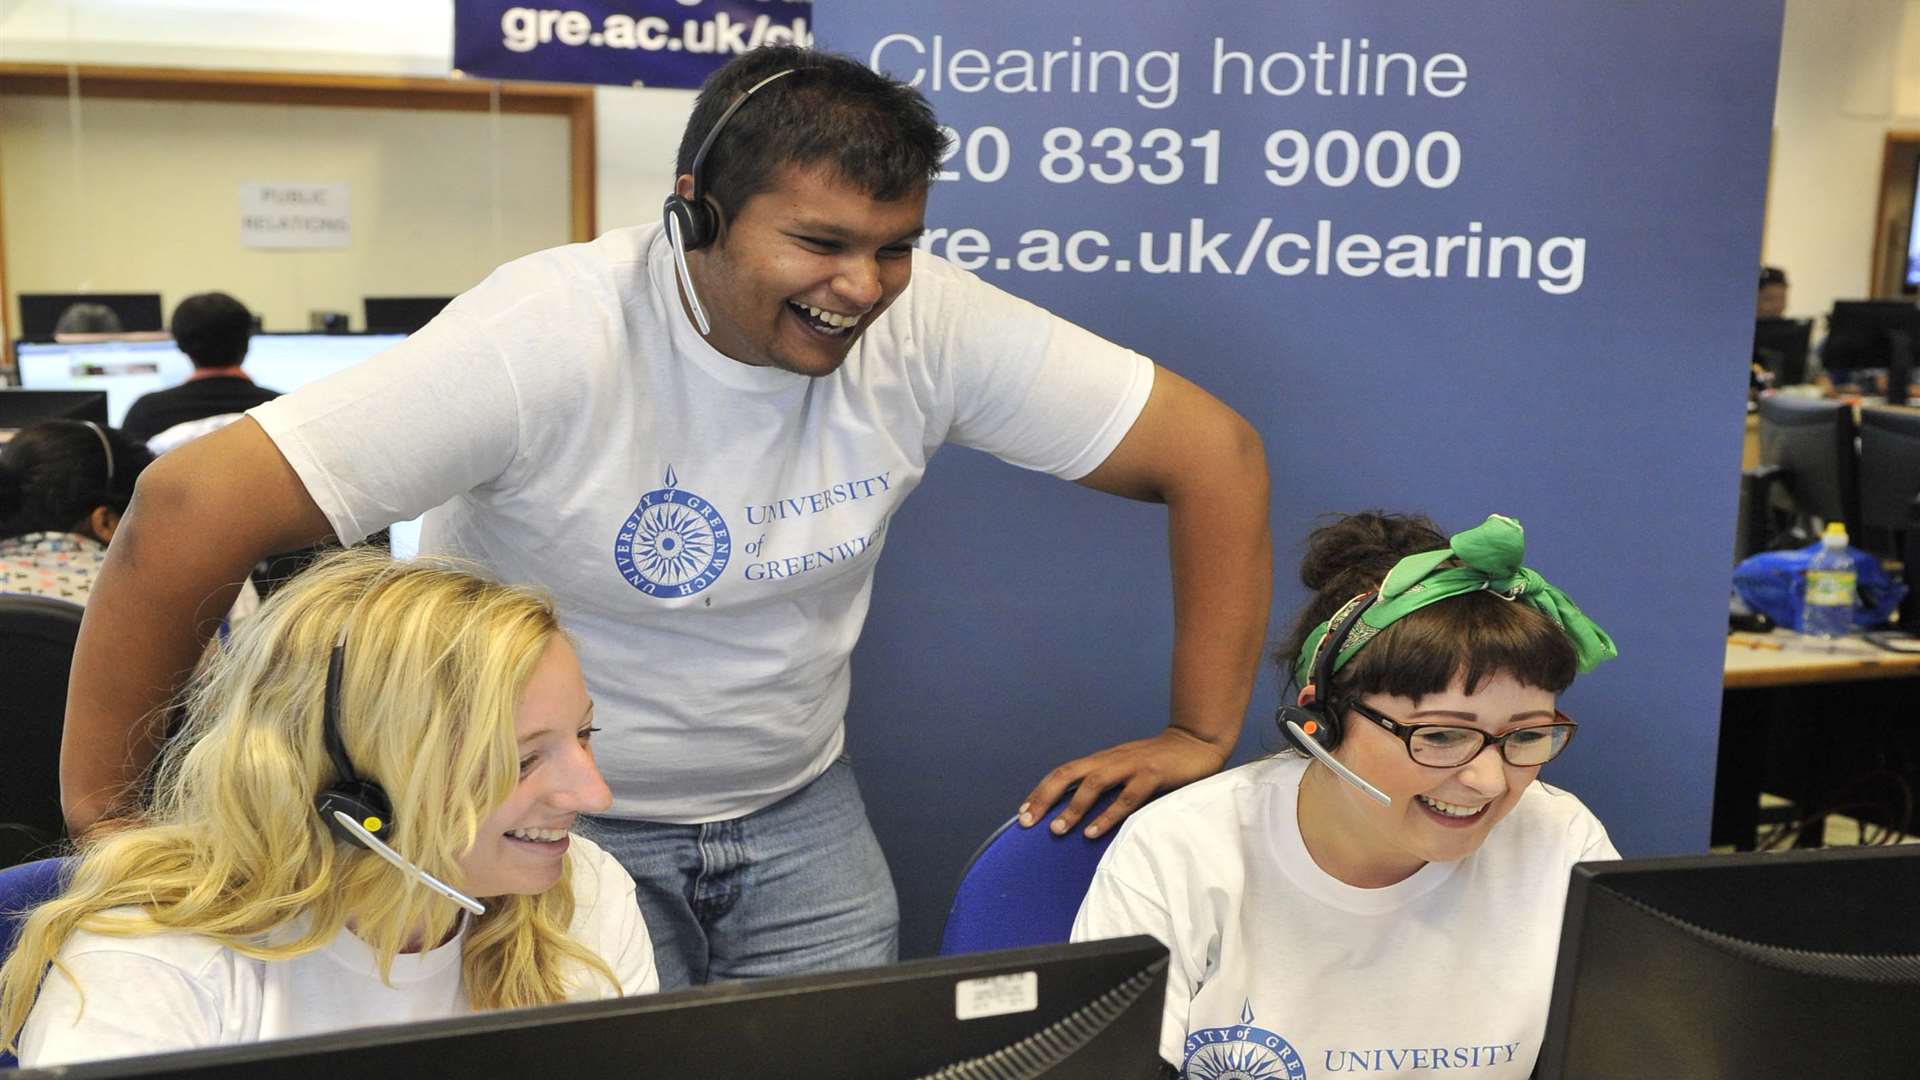 Clearing hotline staff in action at the University of Greenwich at Medway